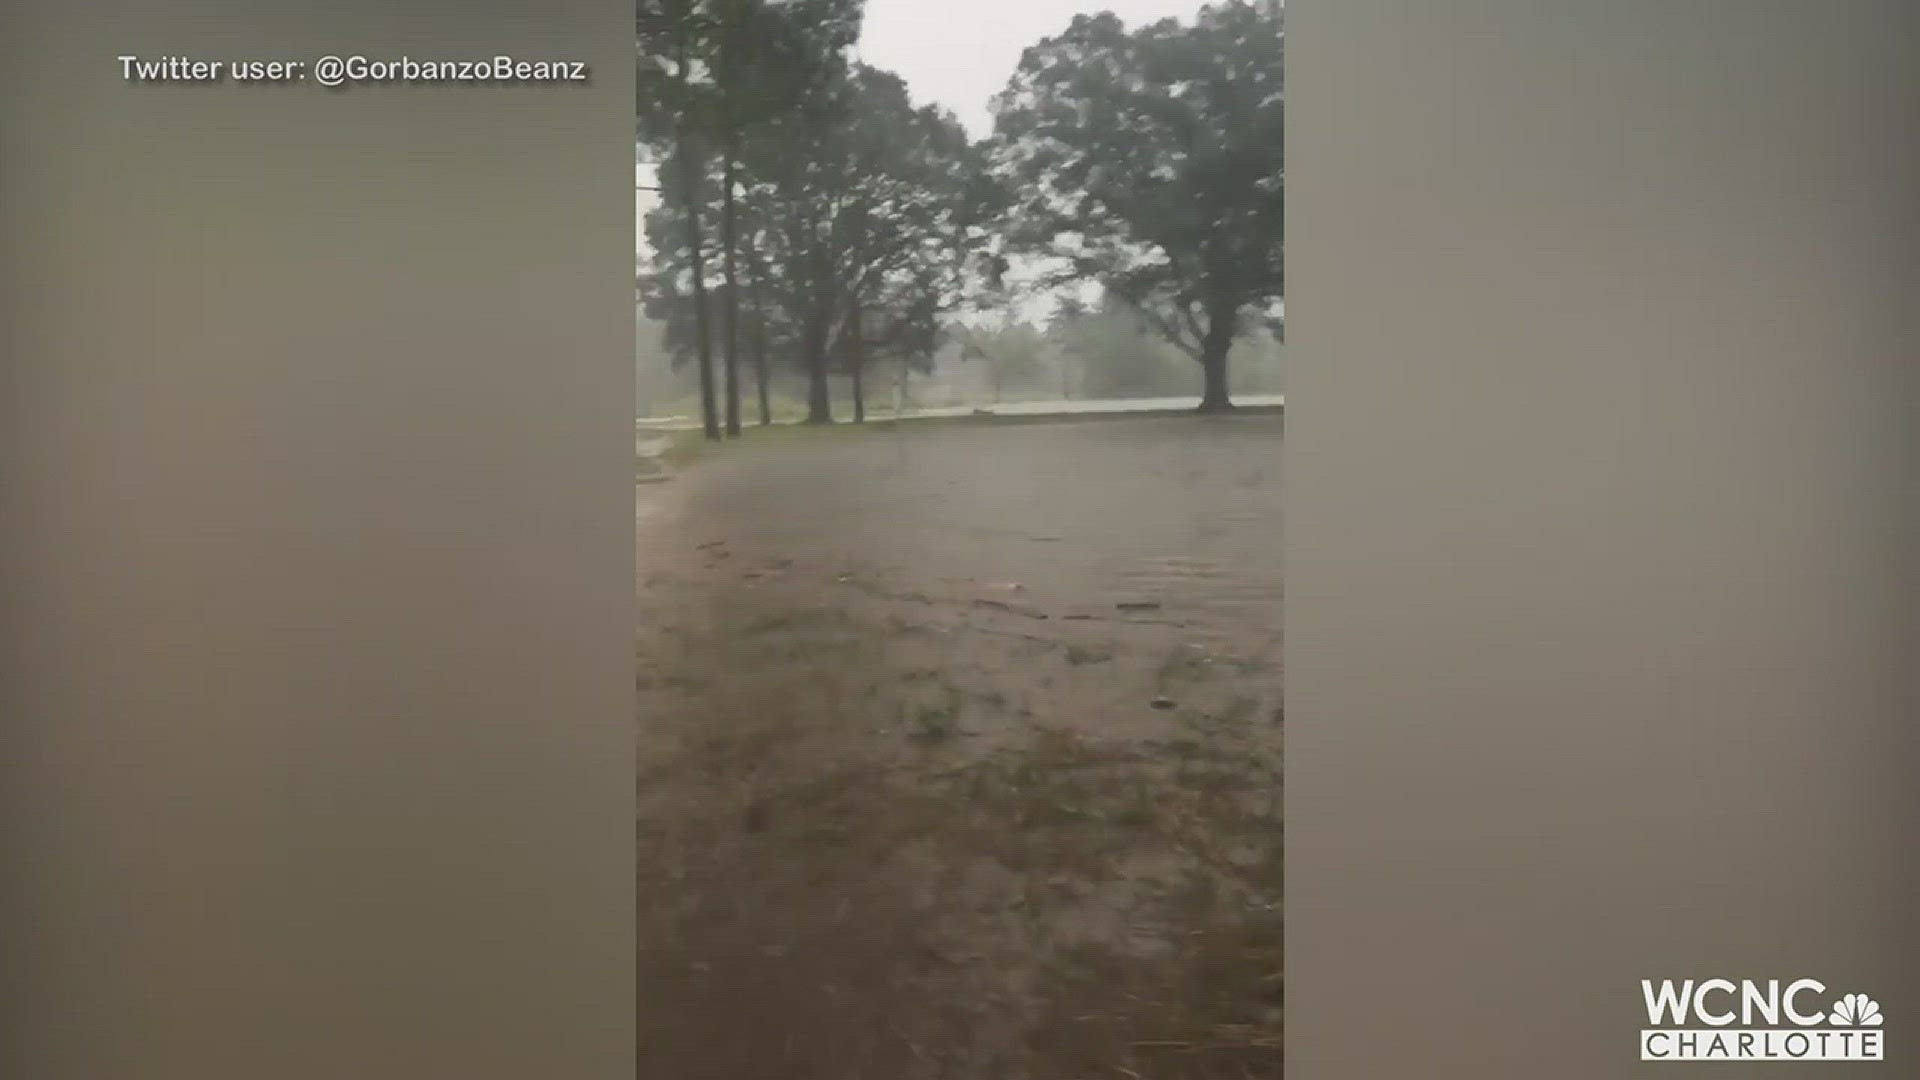 Heavy rain from Tropical Depression Florence led to flash flooding across the Charlotte area, including Briar Creek at Chantilly Park in southeast Charlotte.